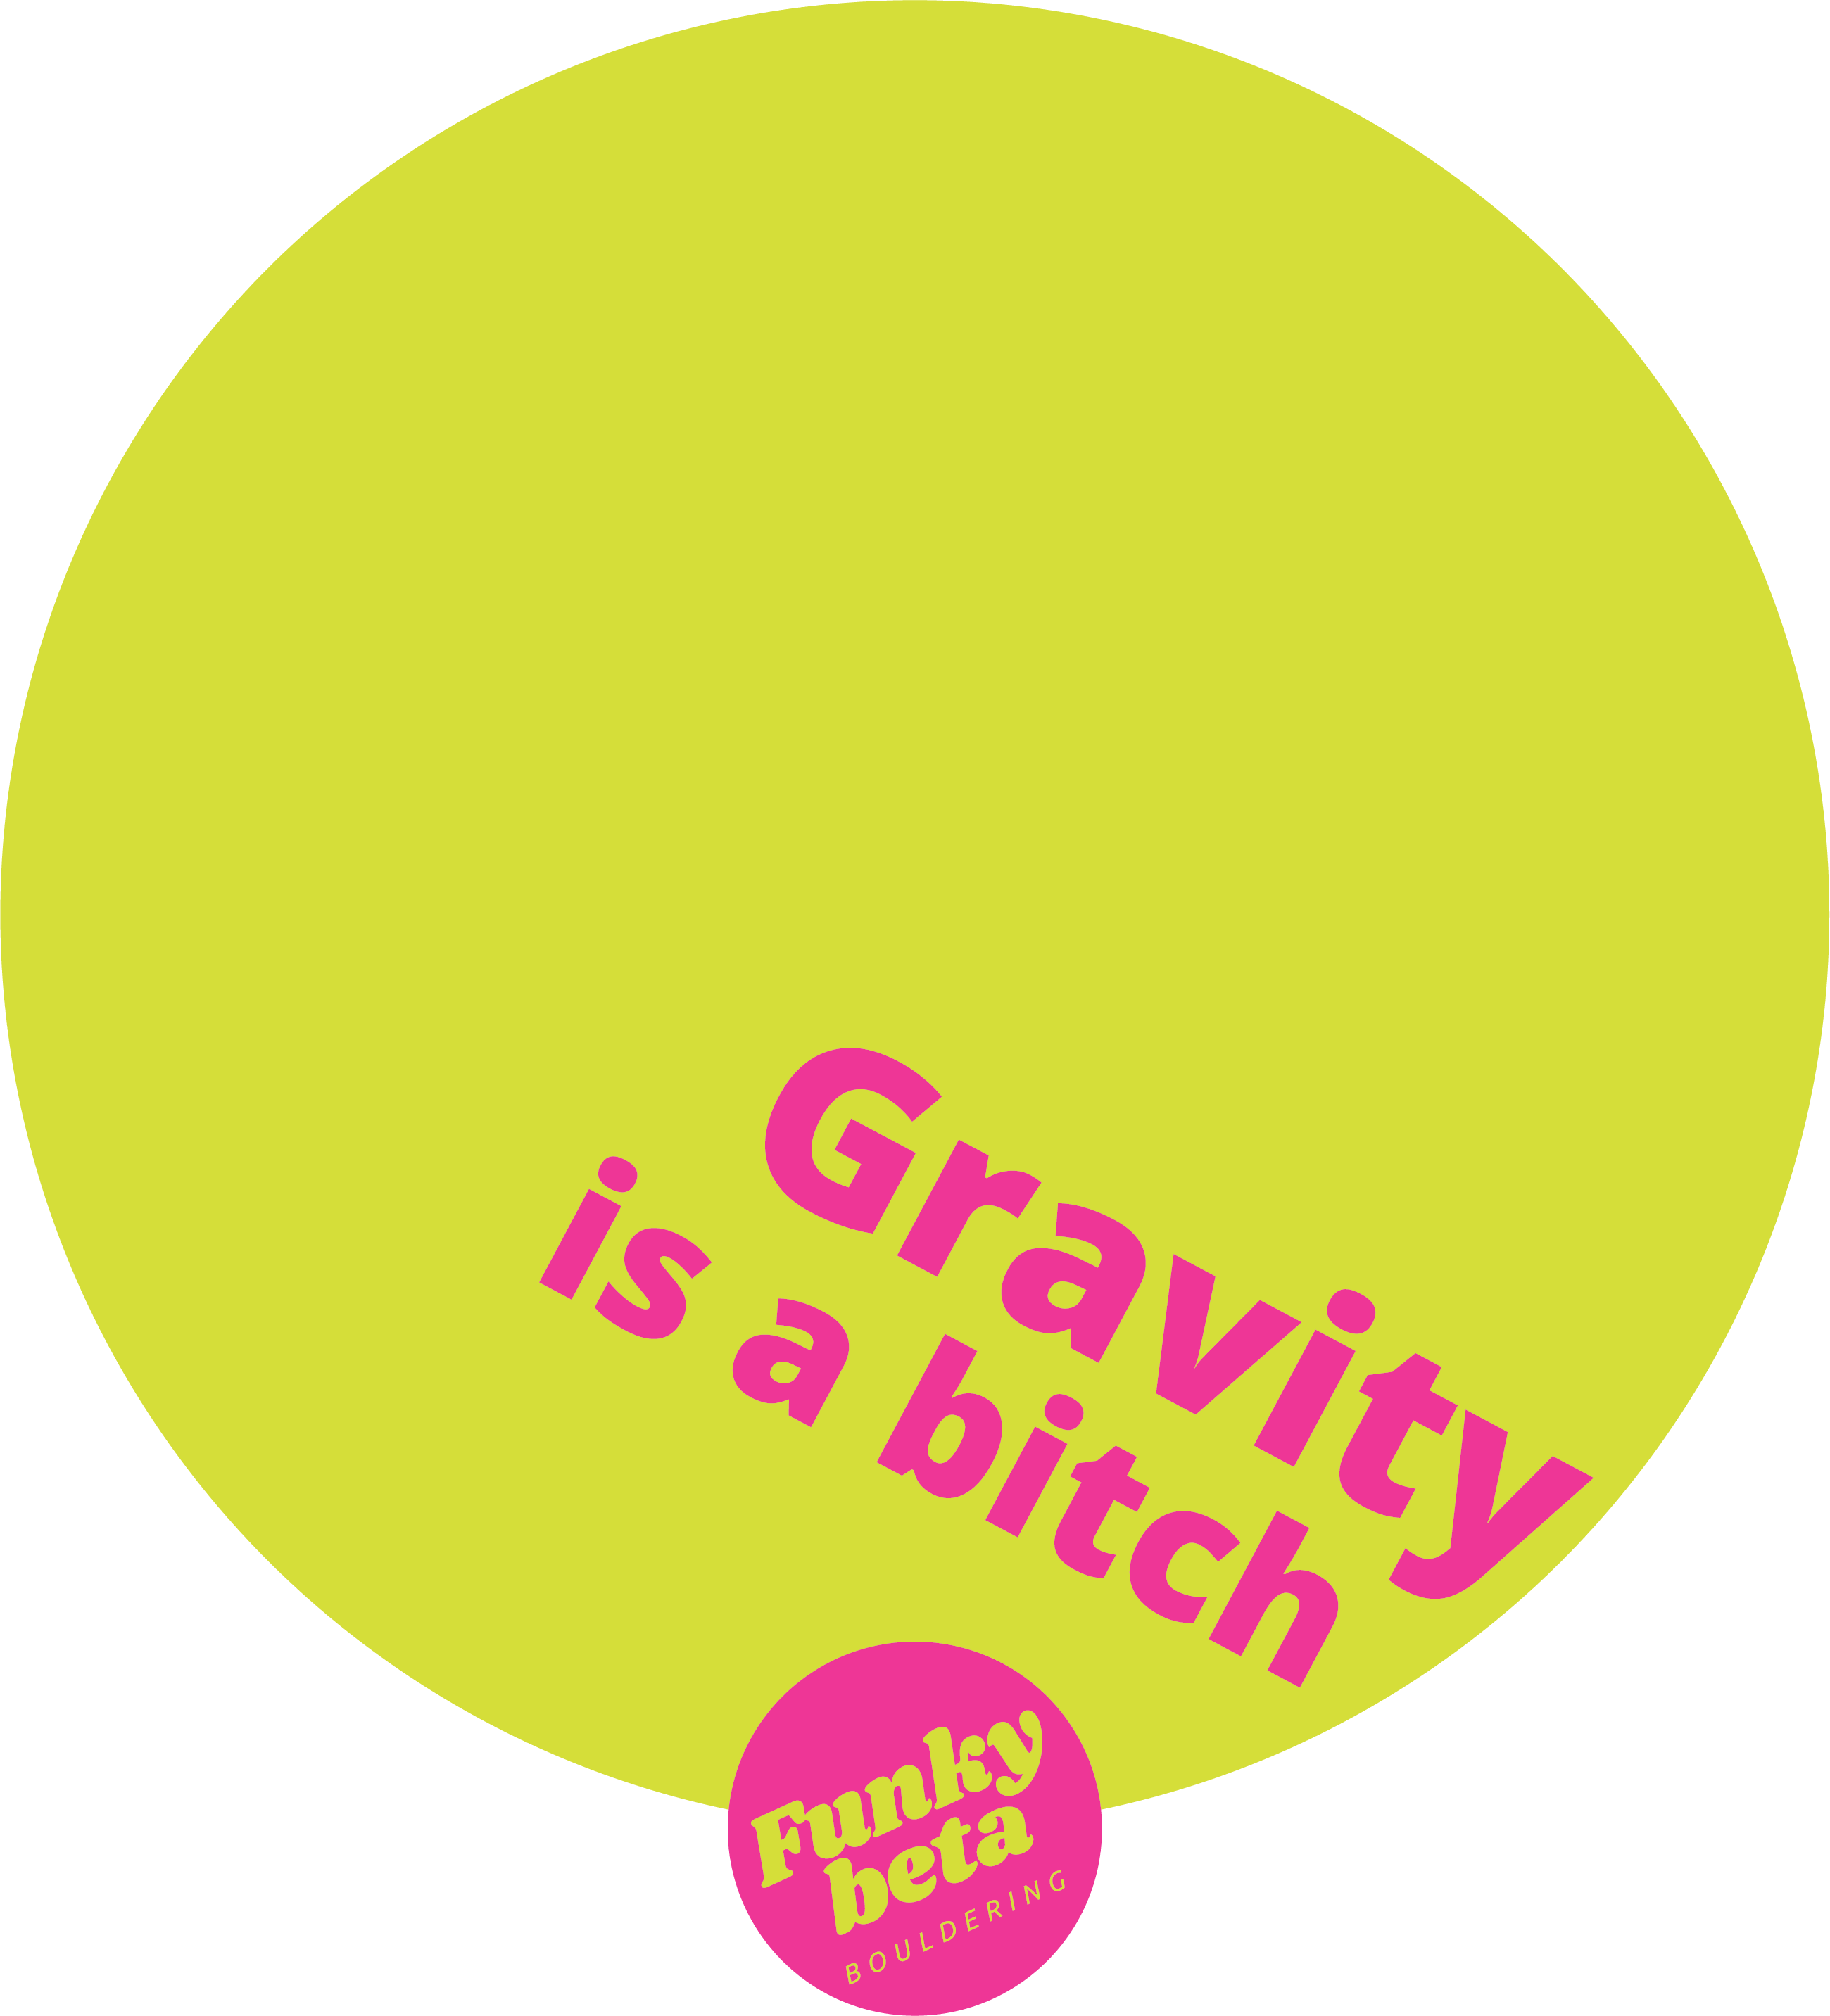 Gravity is a b**** - on stock